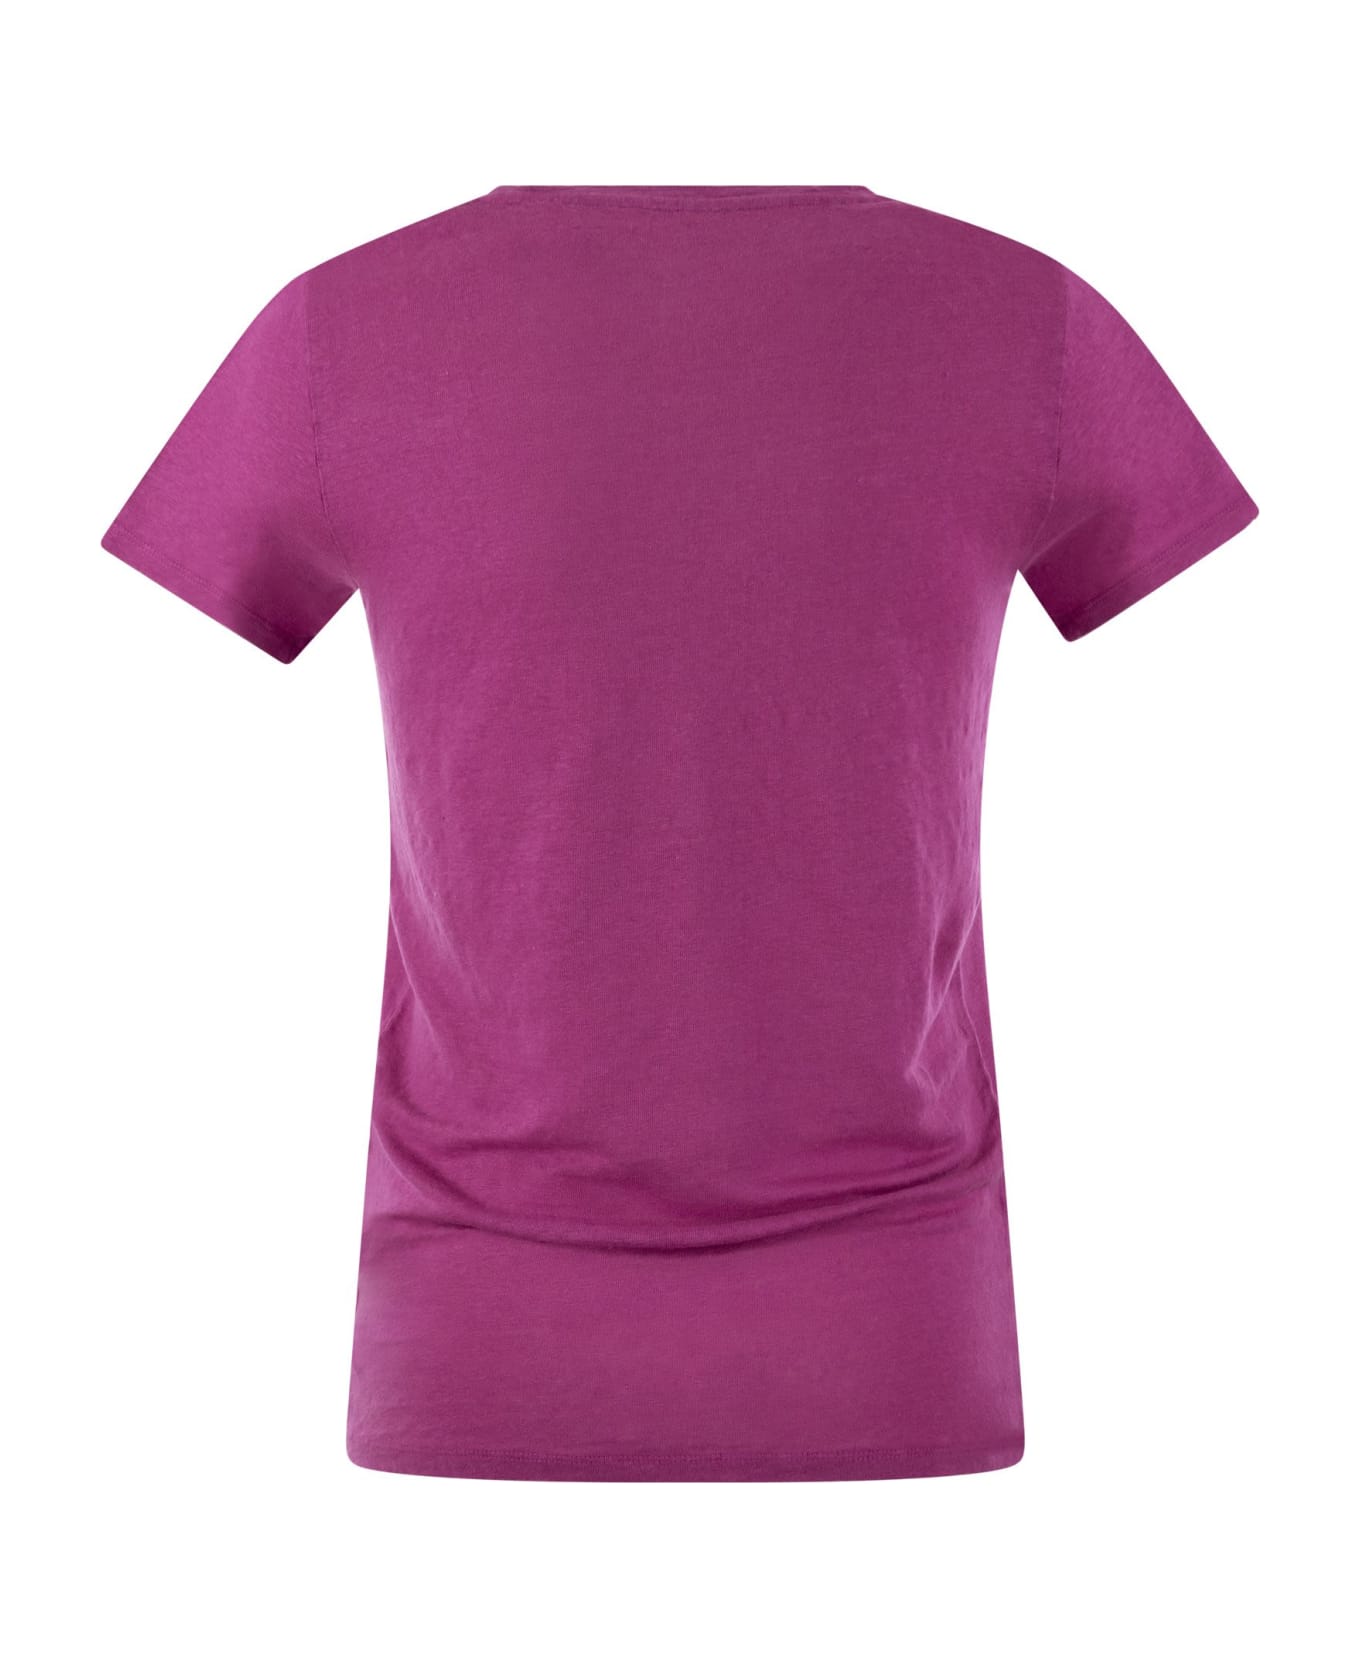 Majestic Filatures Crew-neck T-shirt In Linen And Short Sleeve - Fuchsia